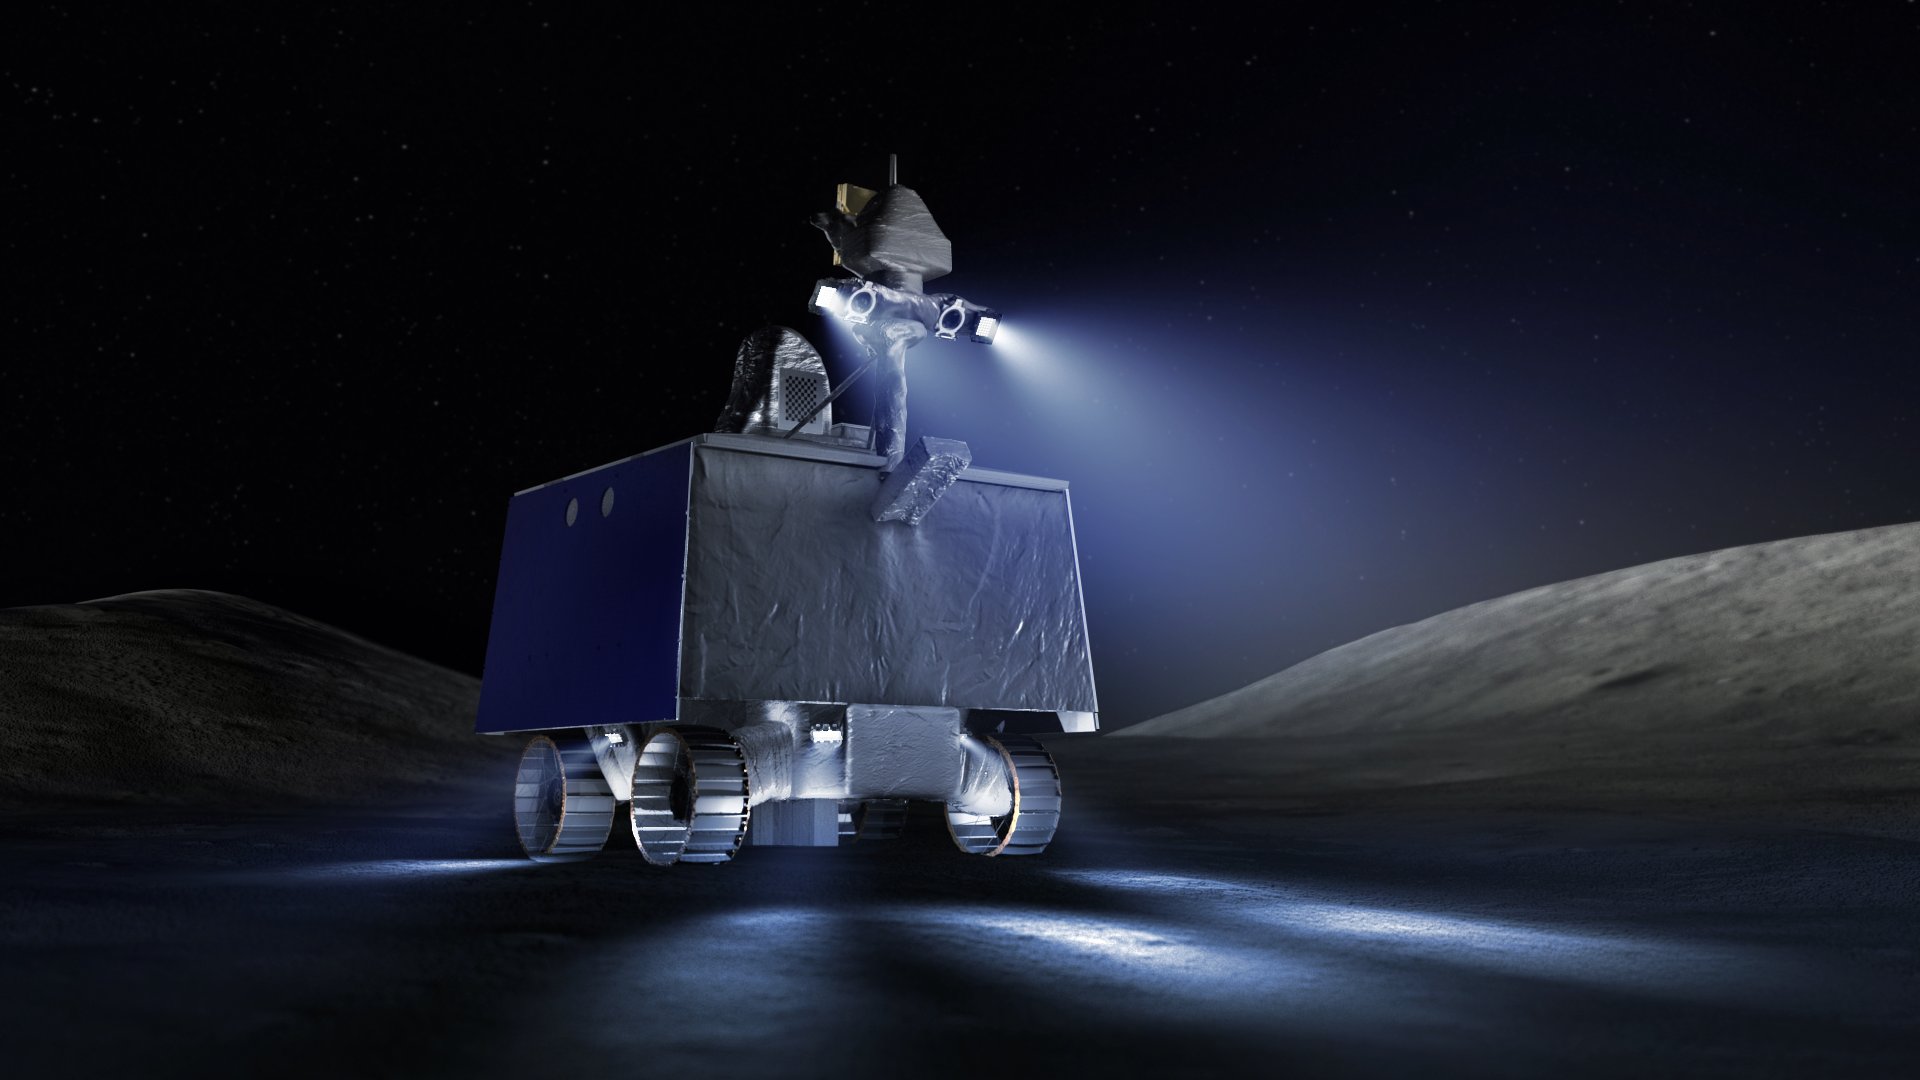 NASA’s first robotic Moon rover is almost complete